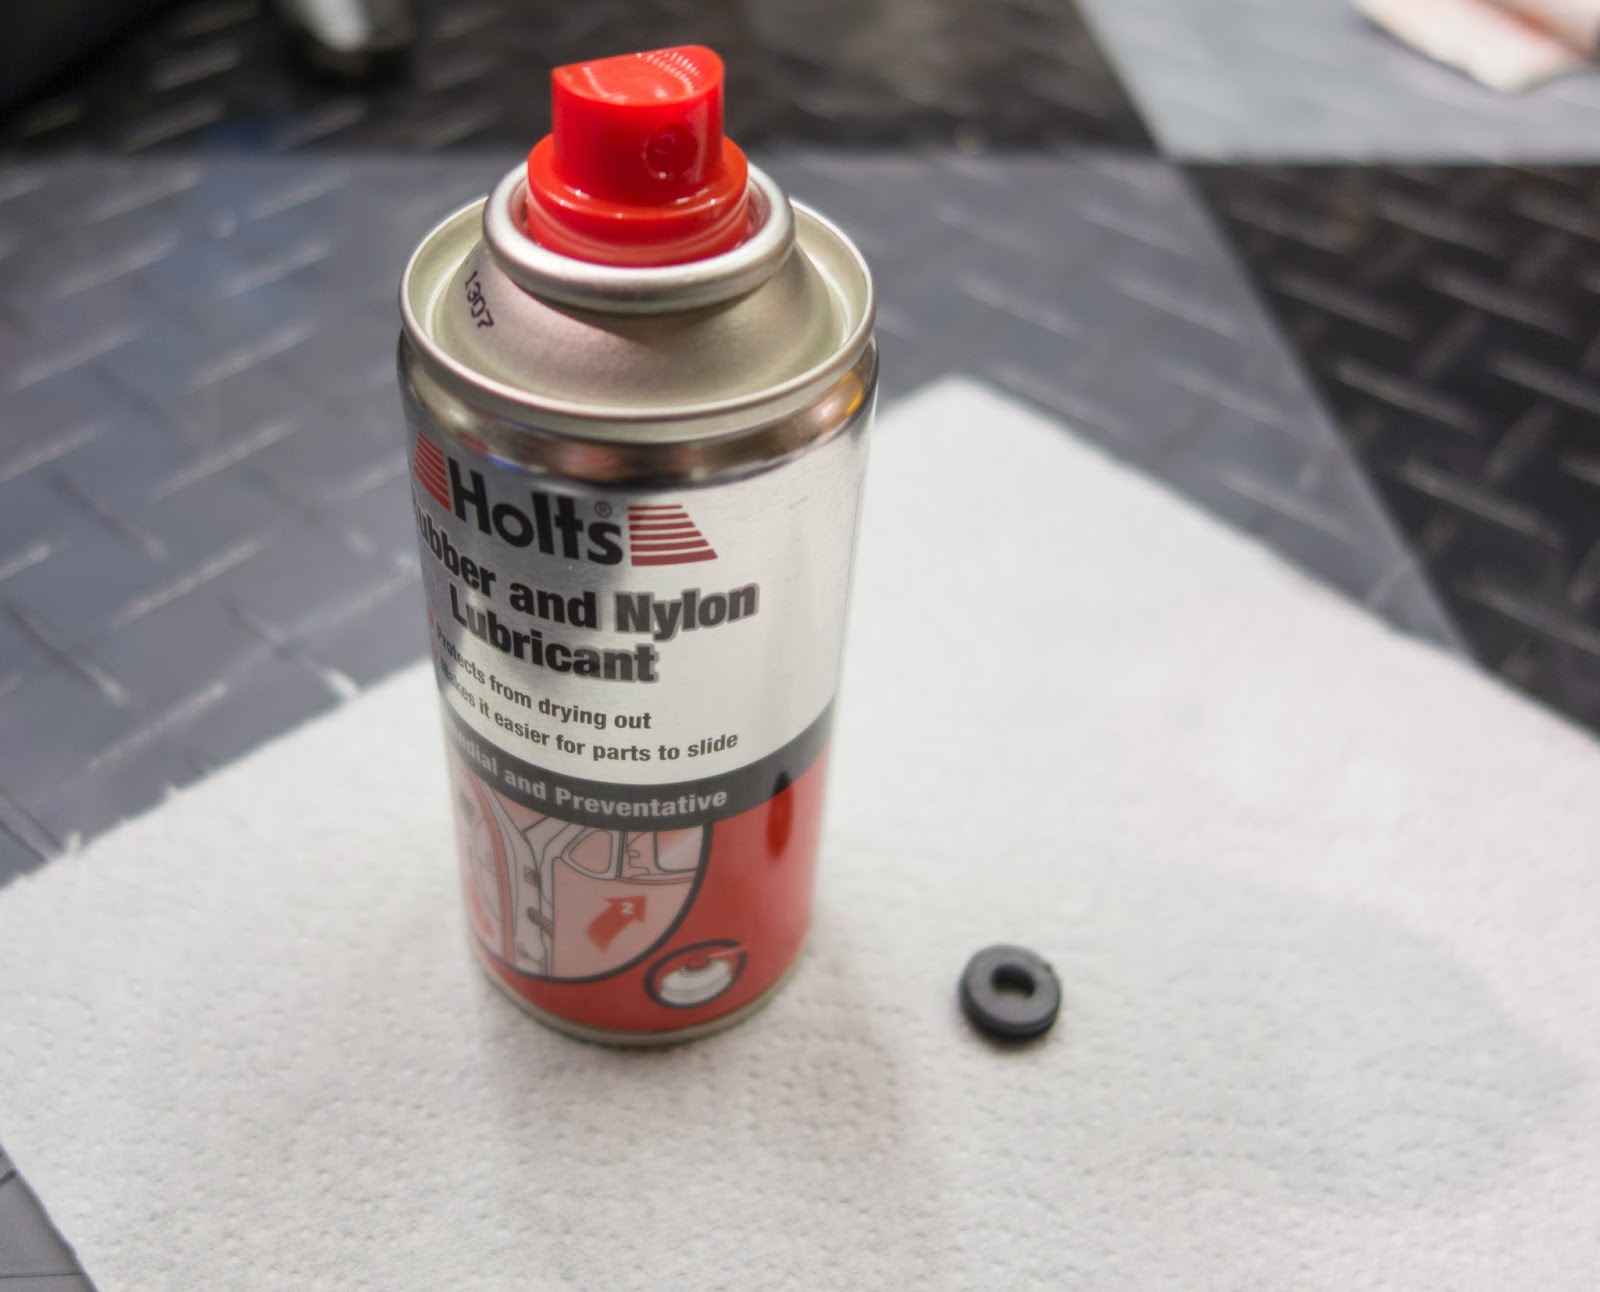 Spray a little Holts RL2R Rubebr and Nylon lubricant on the grommet.